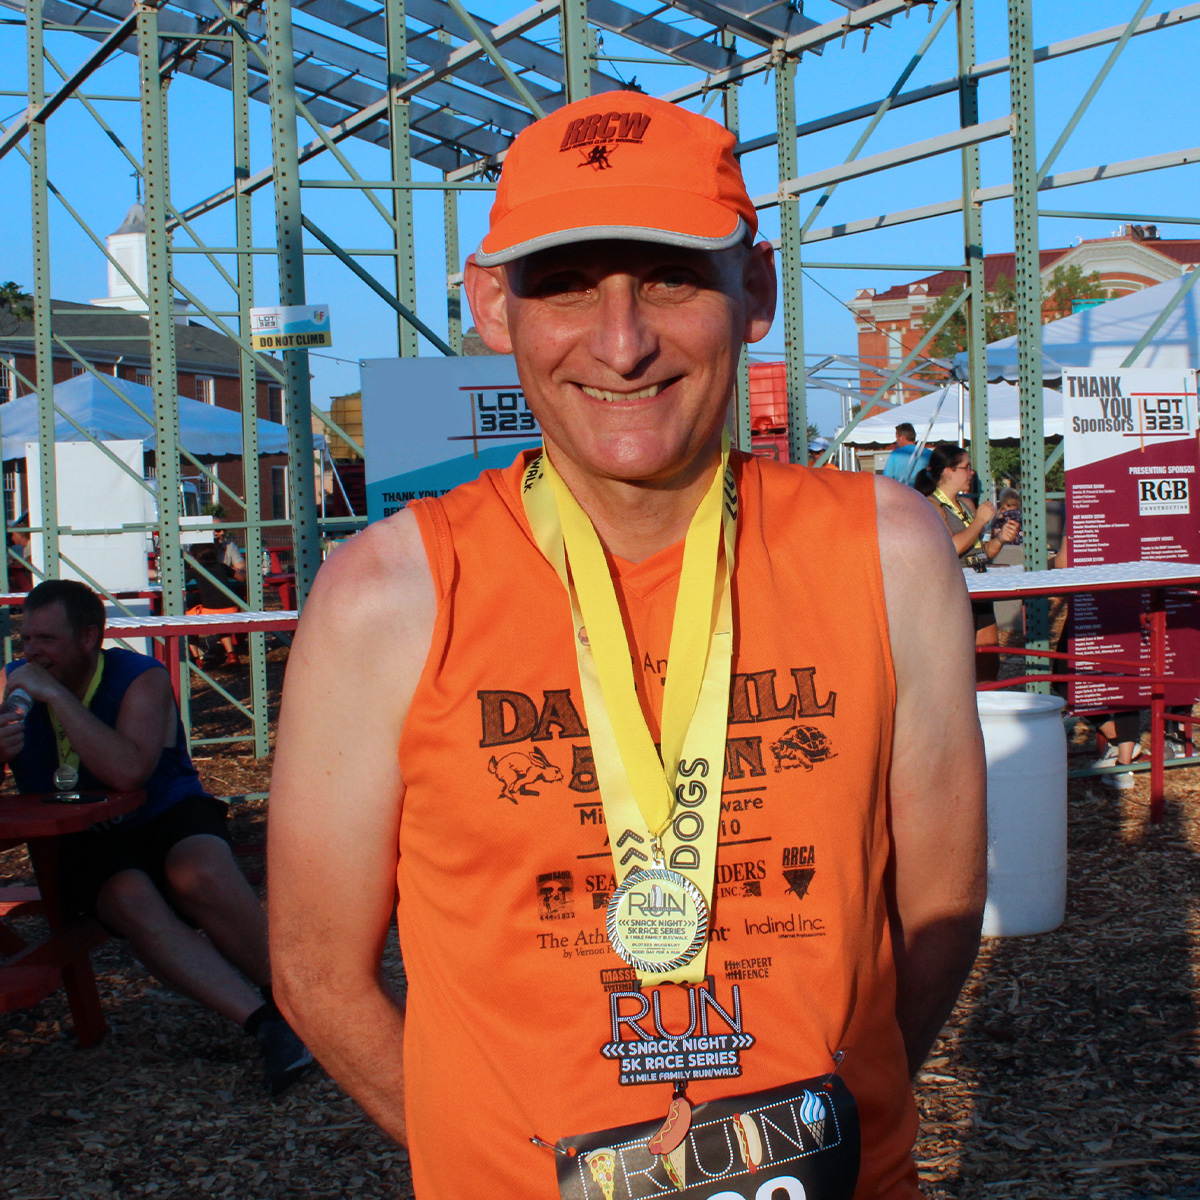 Ian smiling and wearing a finisher medal after running a race. 

